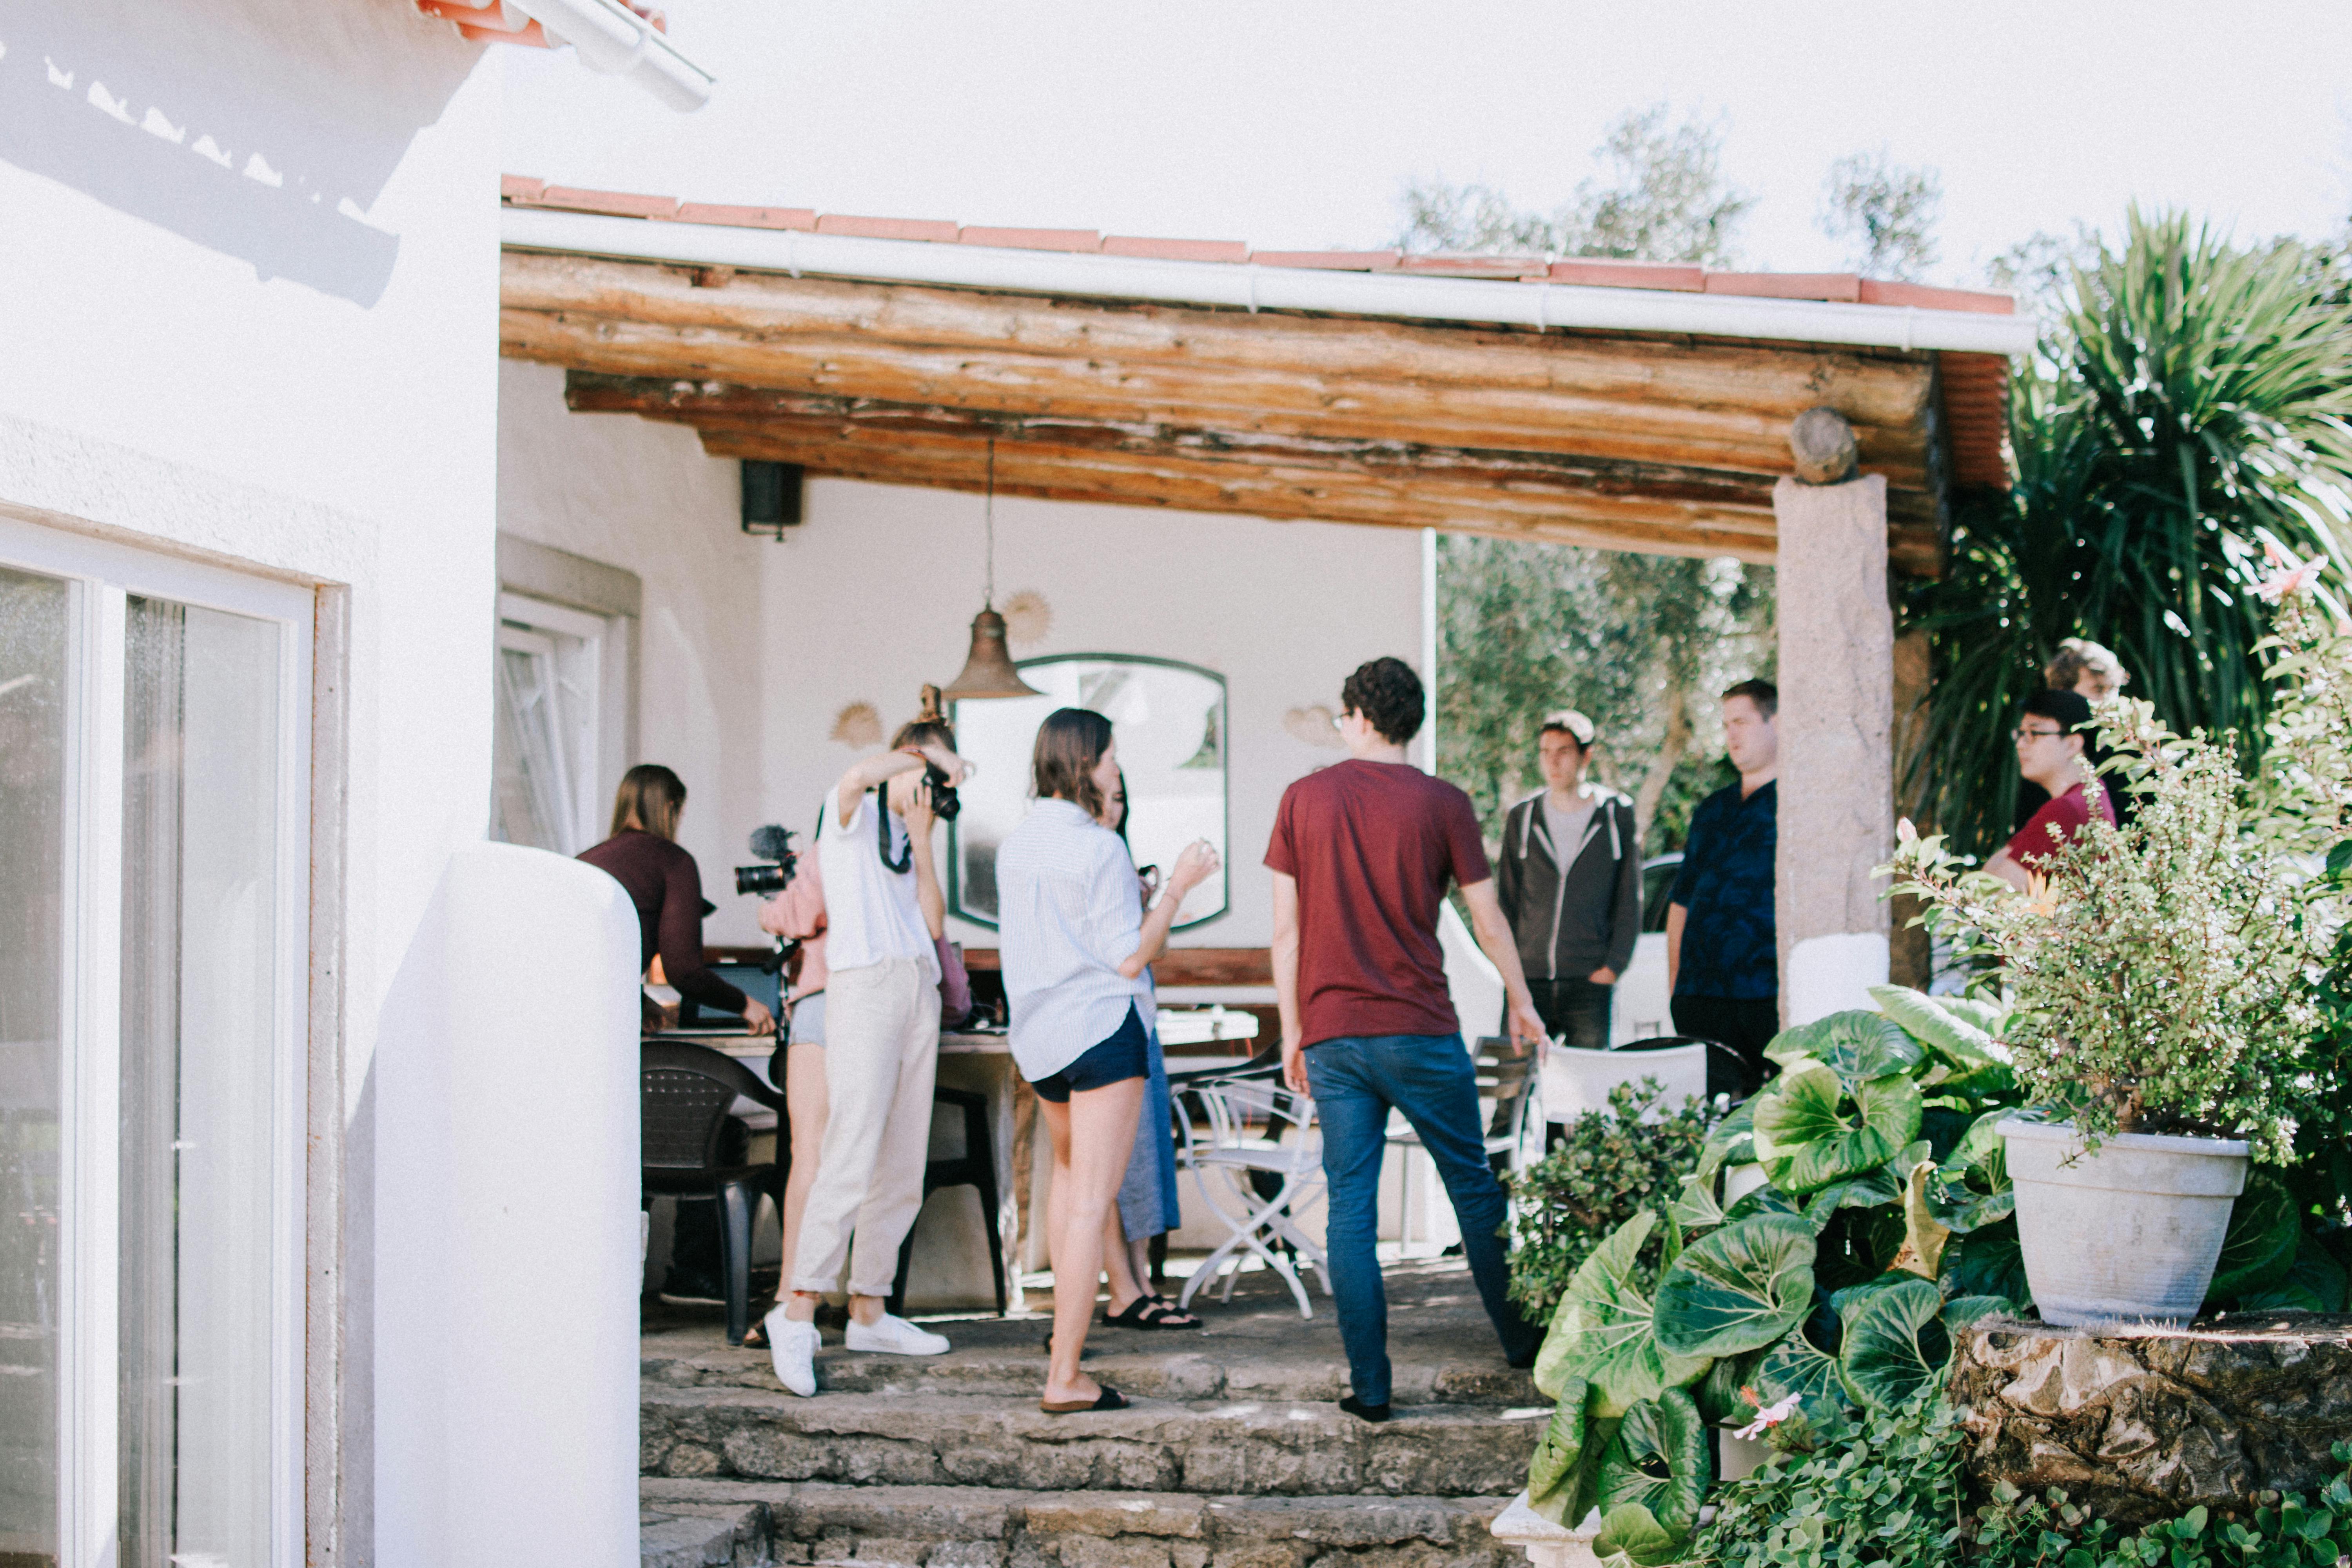 An outdoor house gathering | Source: Pexels